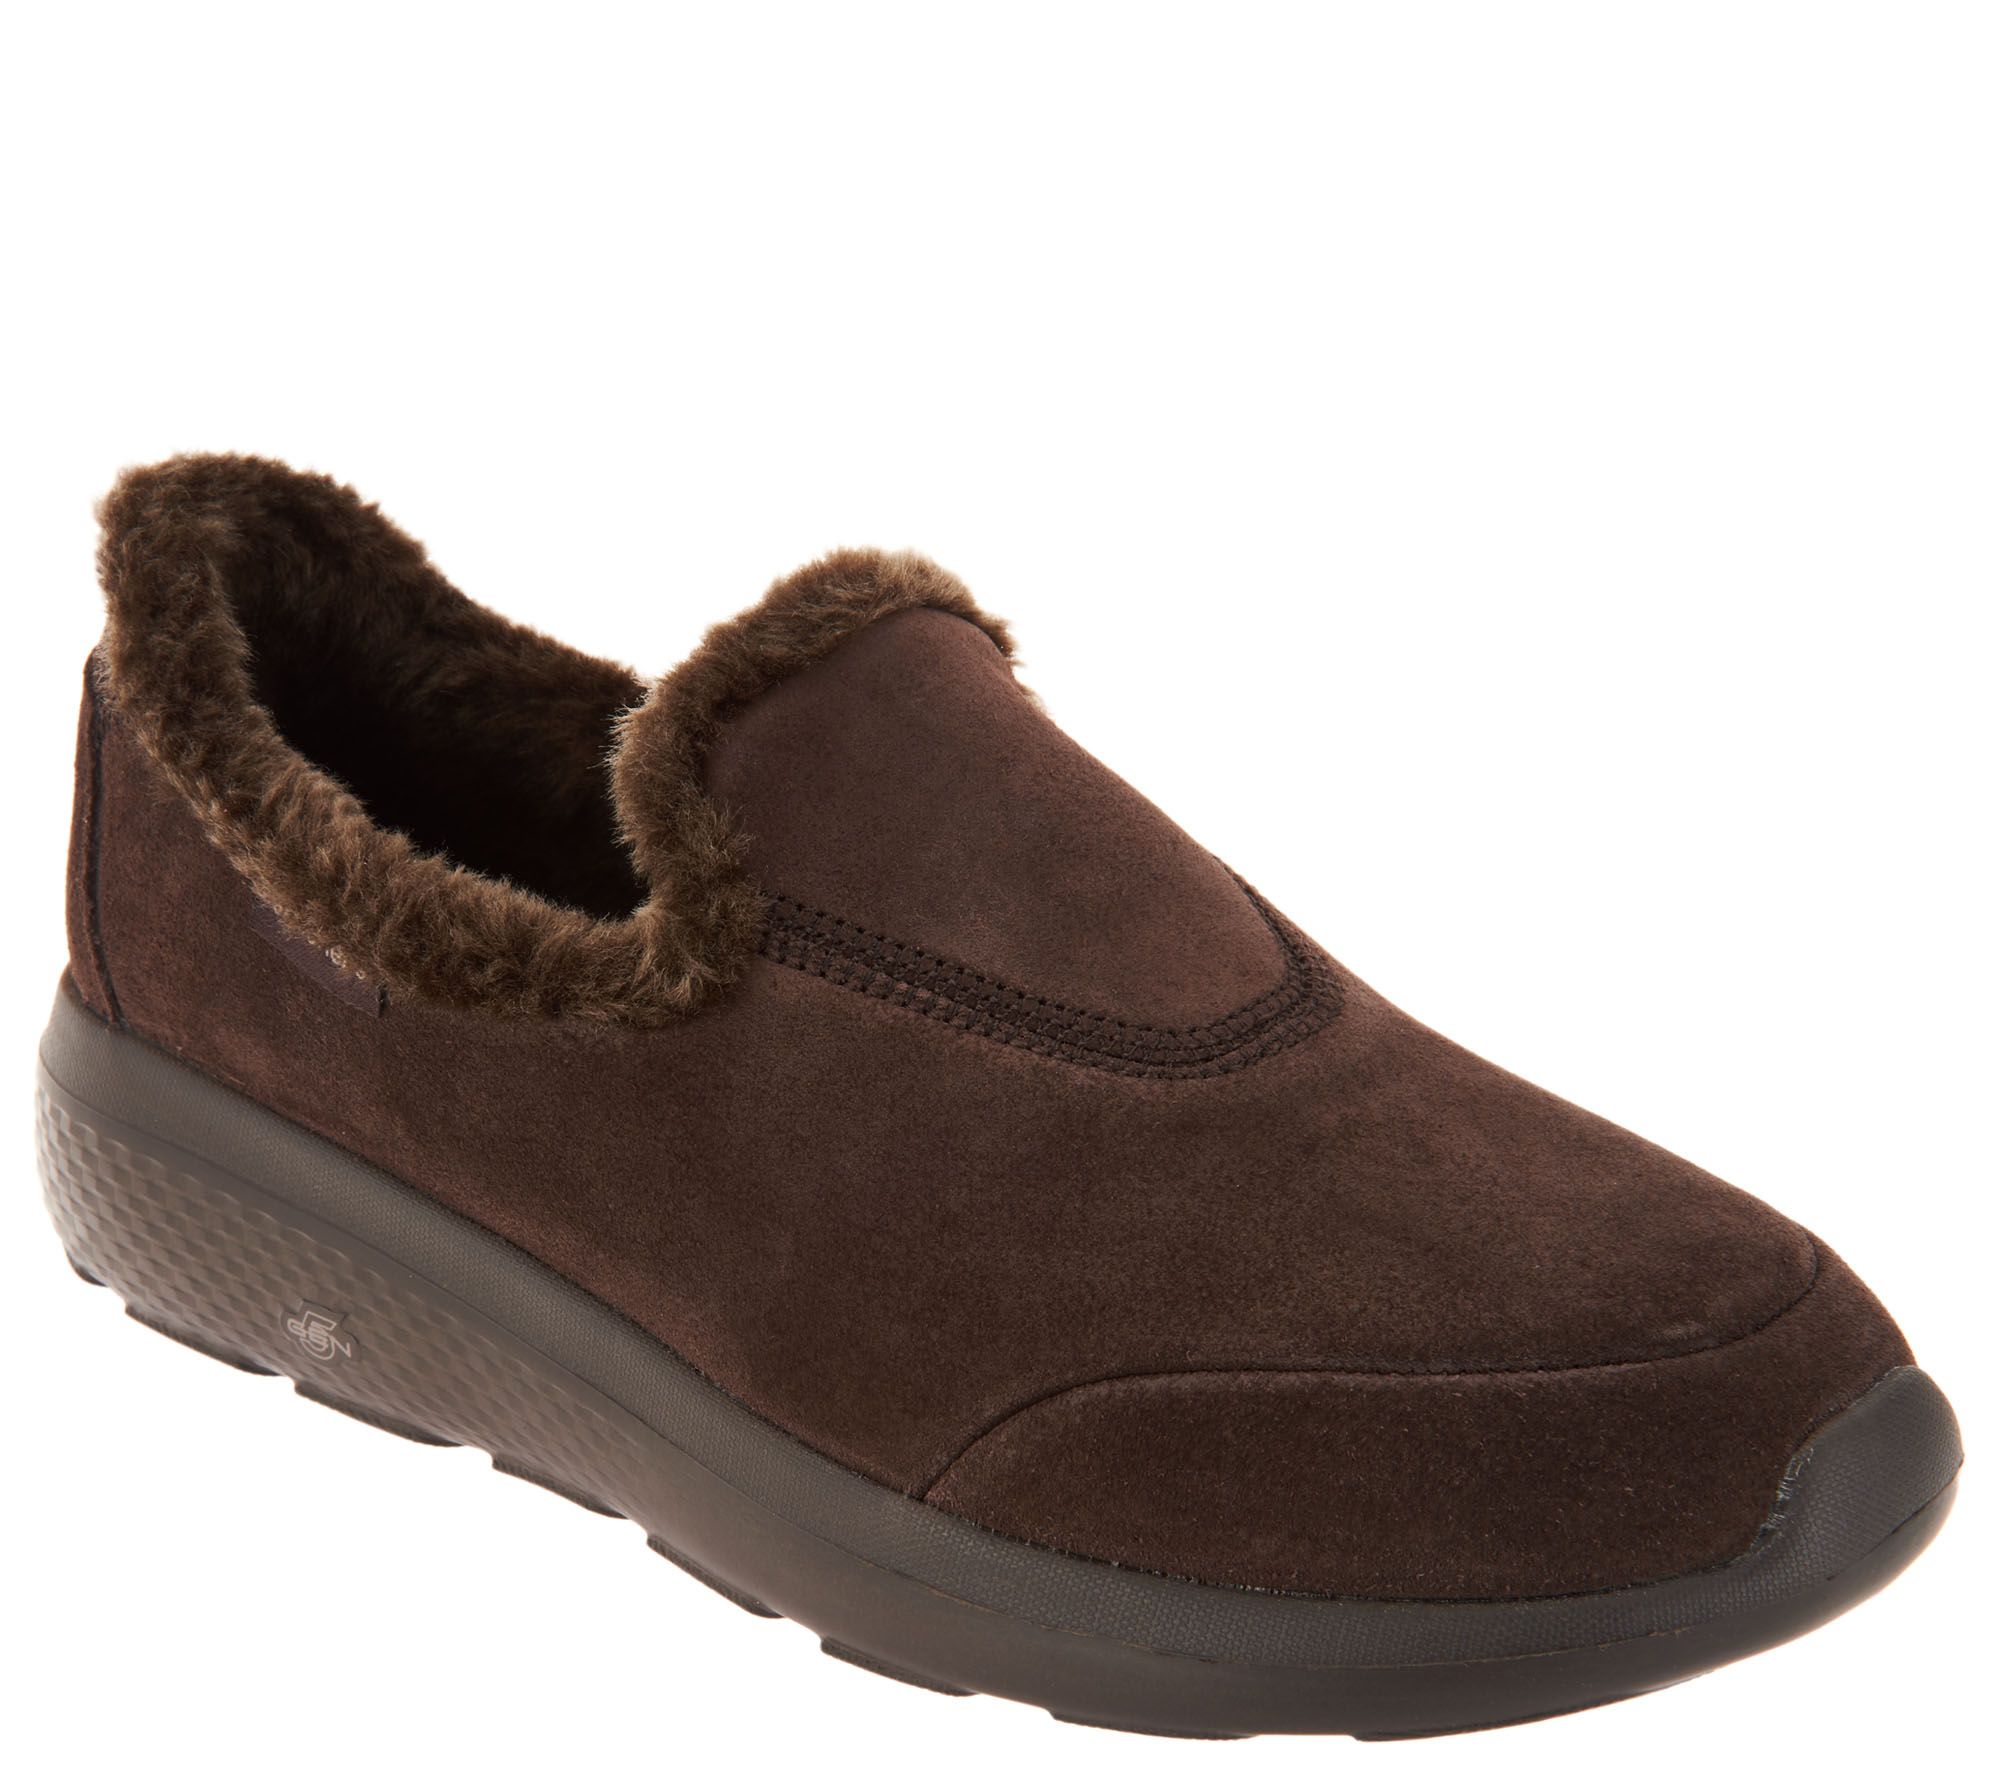 skechers gowalk suede clogs with faux fur lining